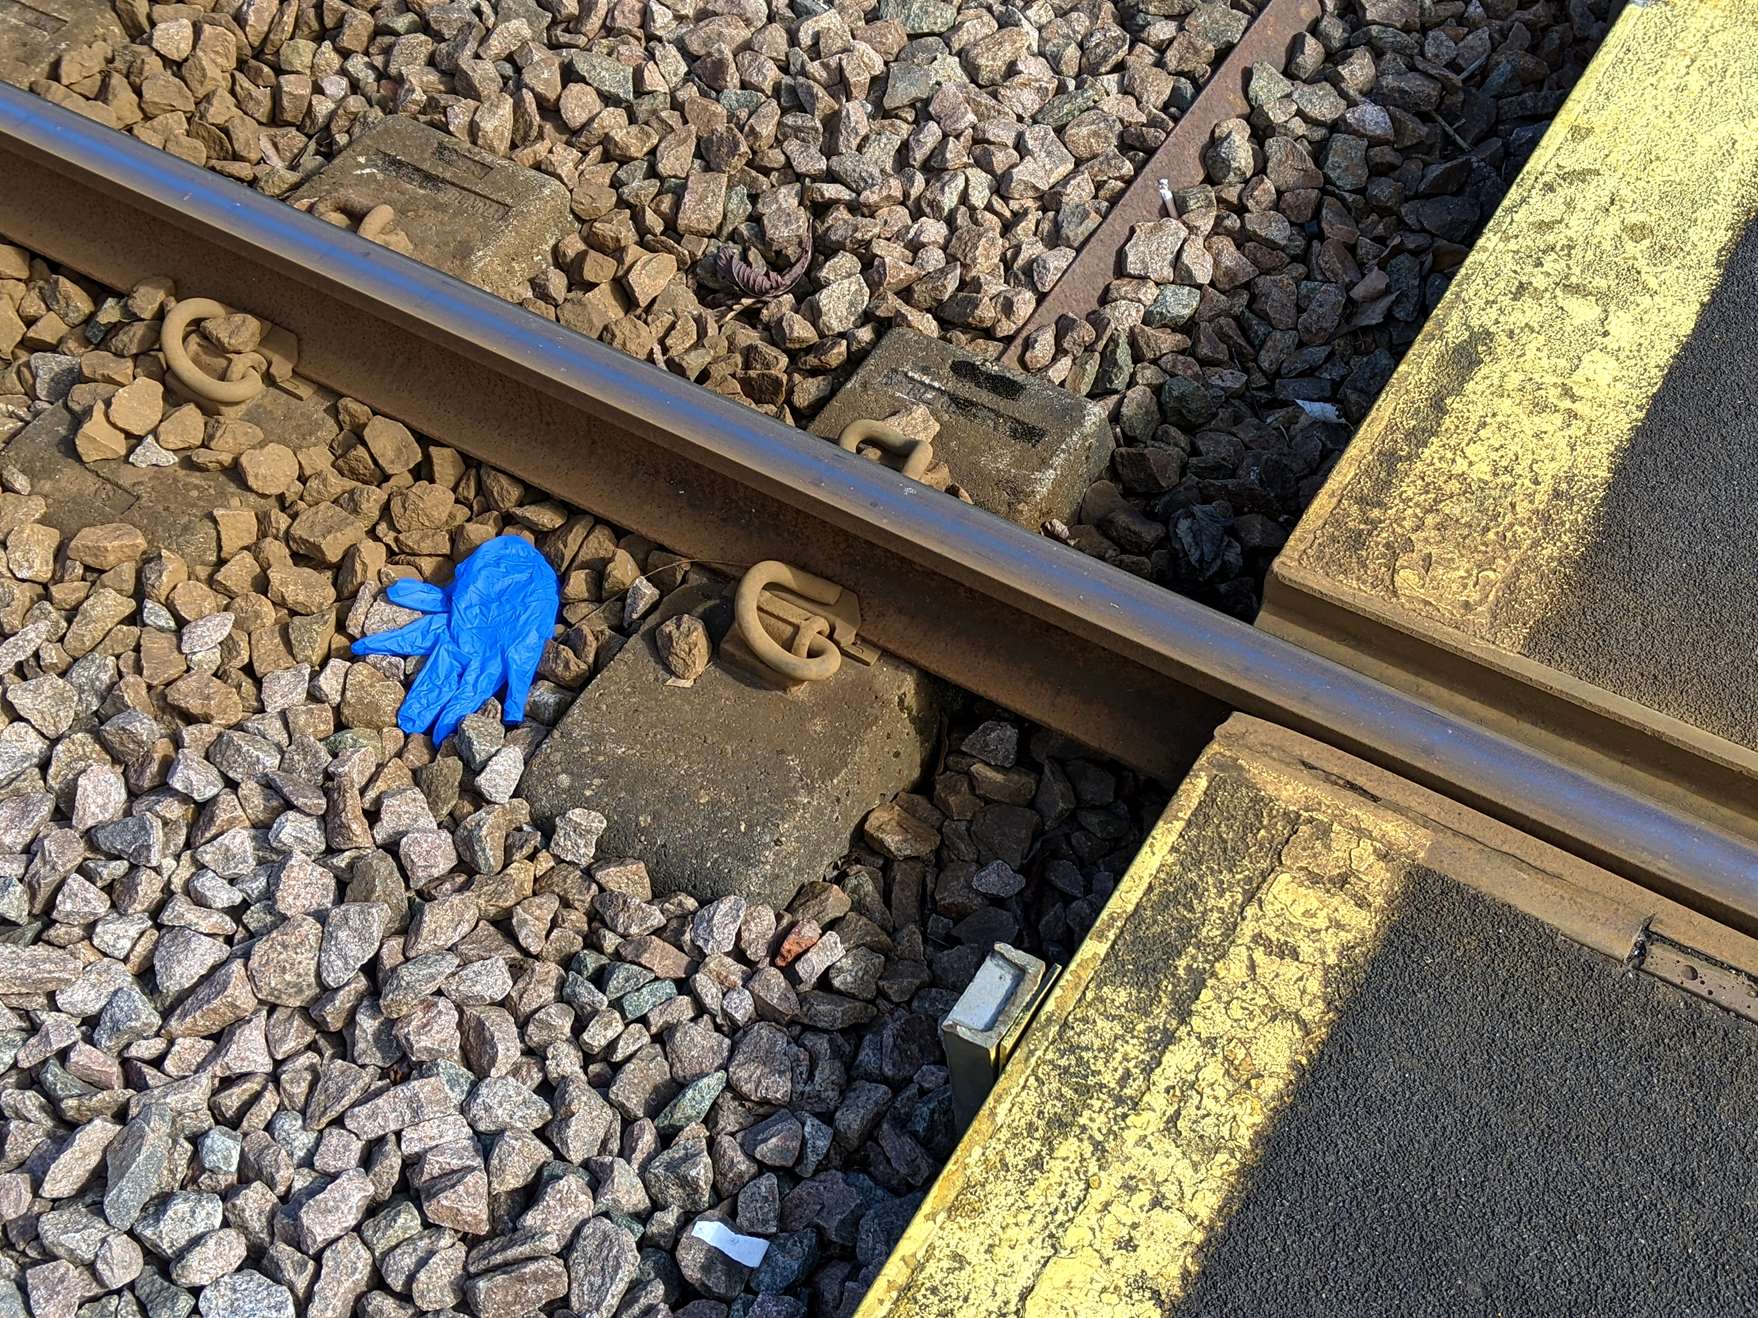 a discarded blue surgical glove next to tram track